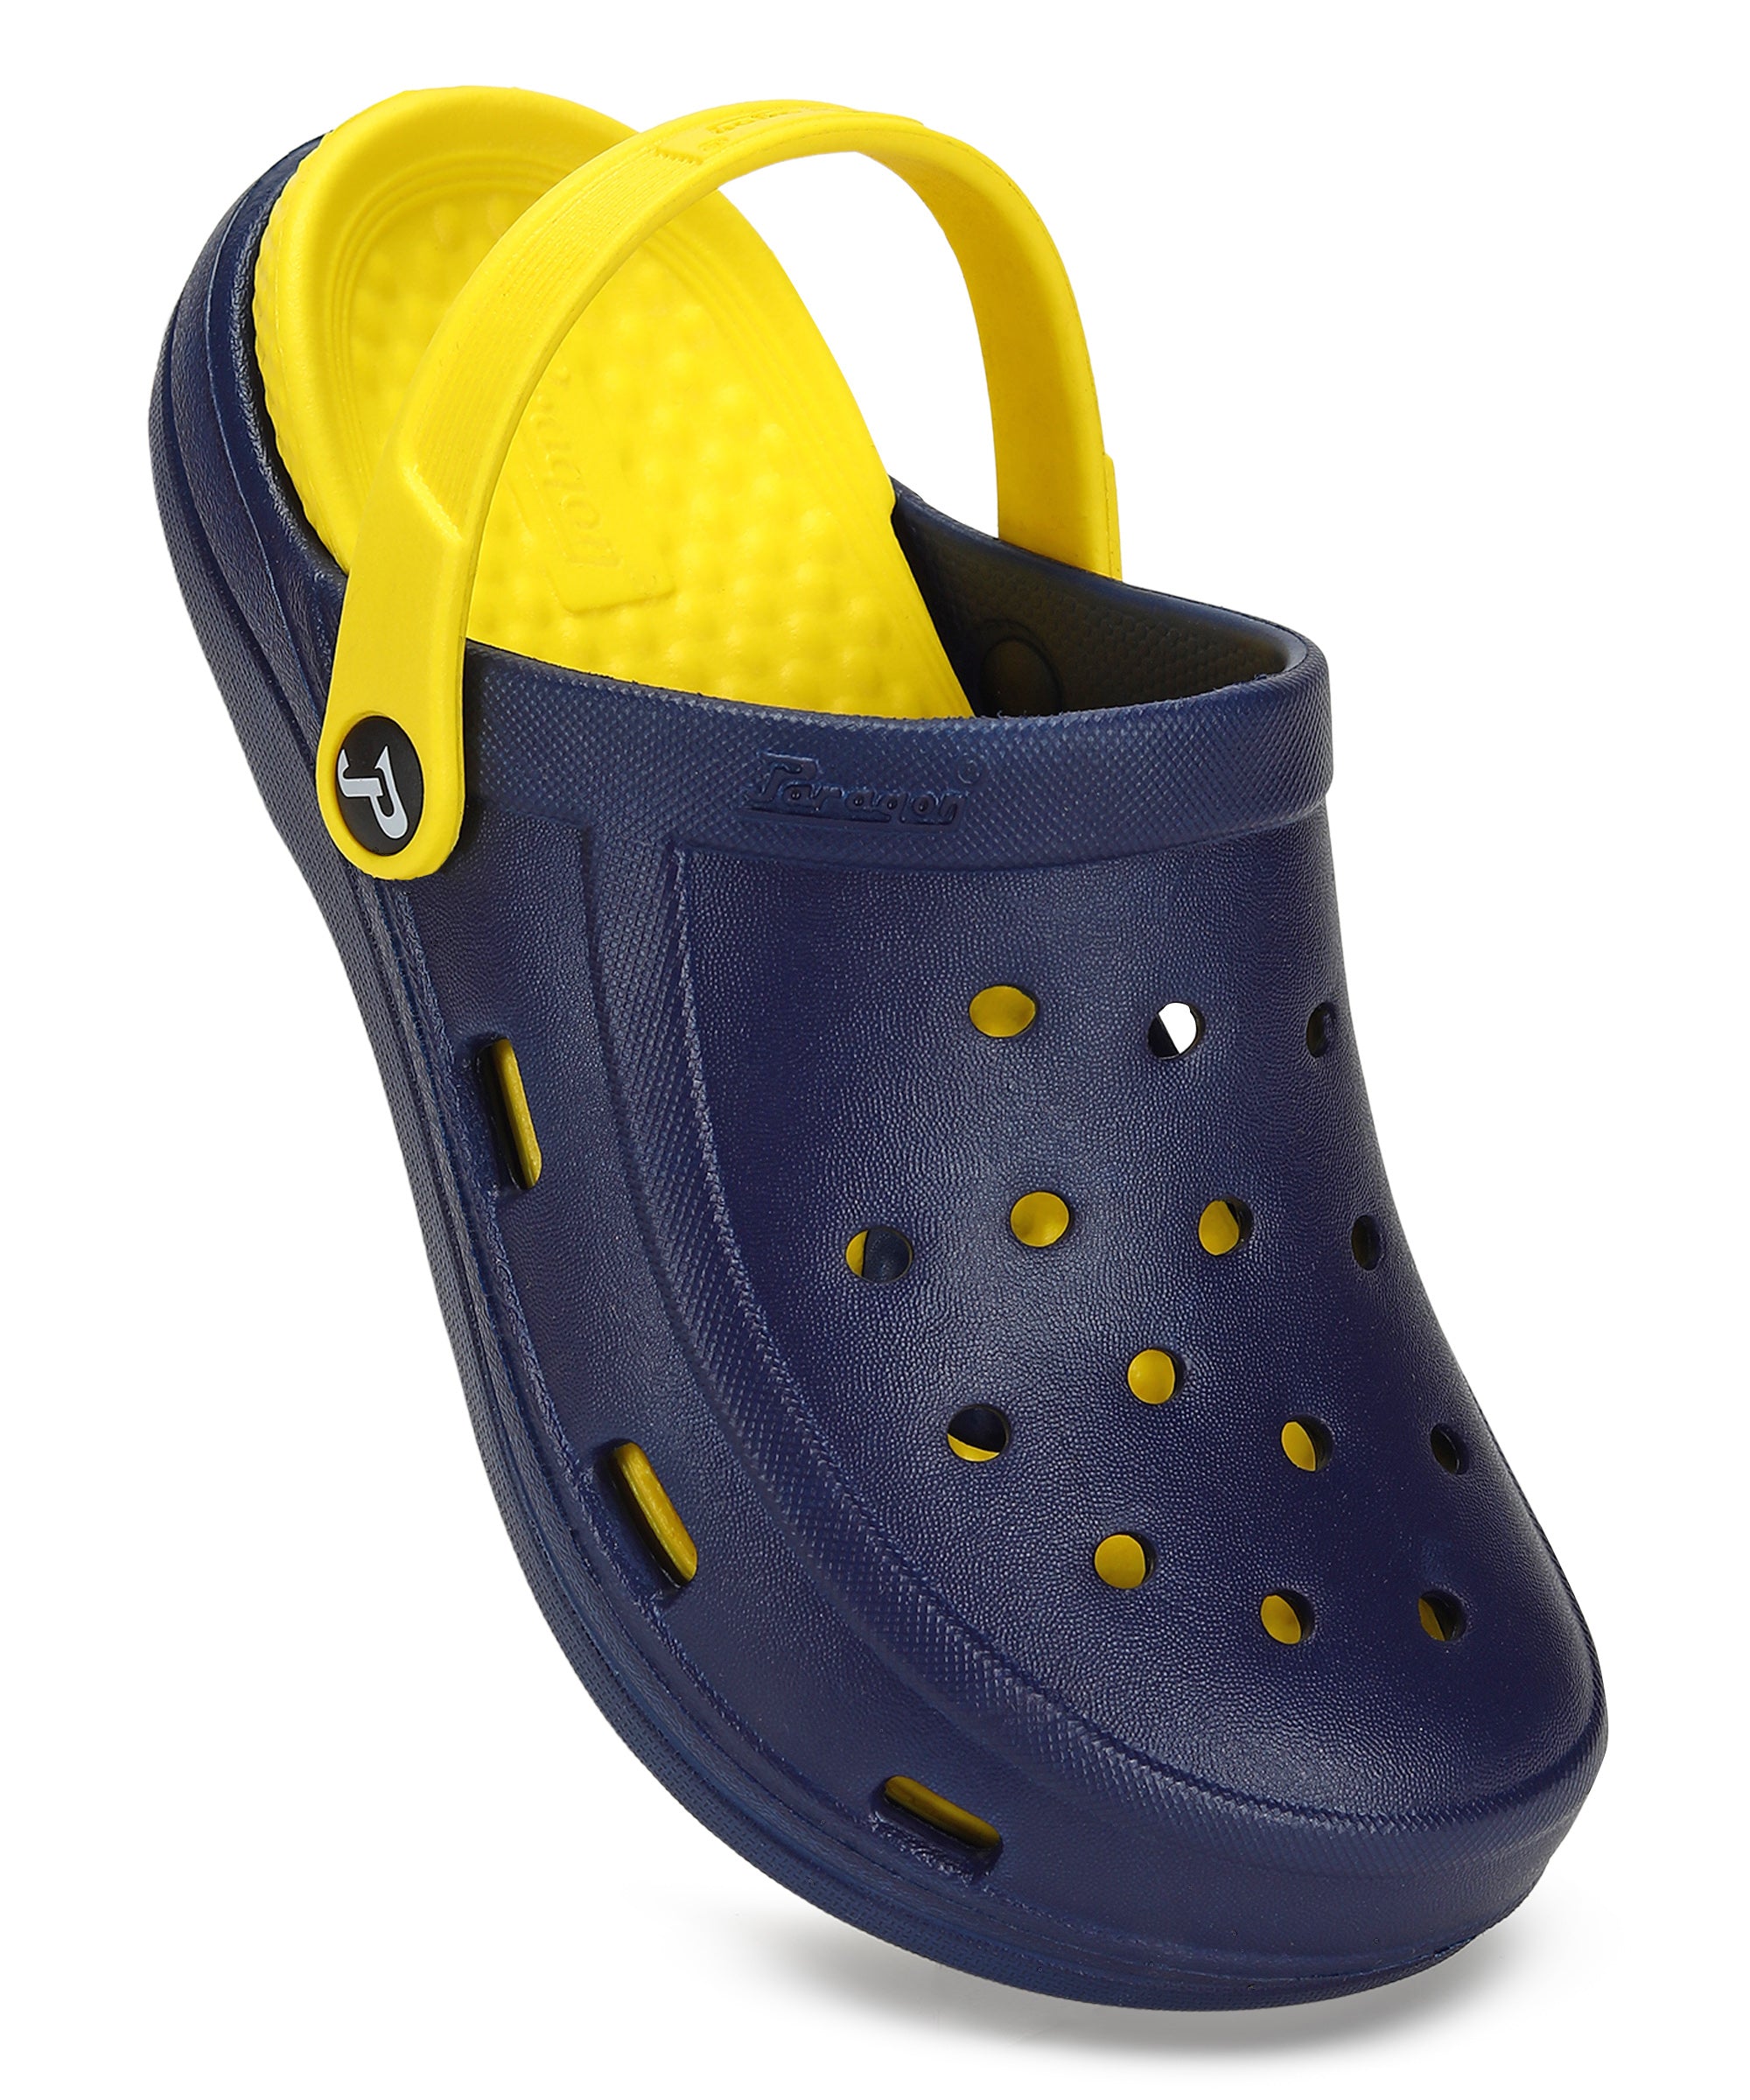 Paragon EVK8004K Unisex Clogs For Kids | Outdoor and Indoor Casual, Durable Clogs